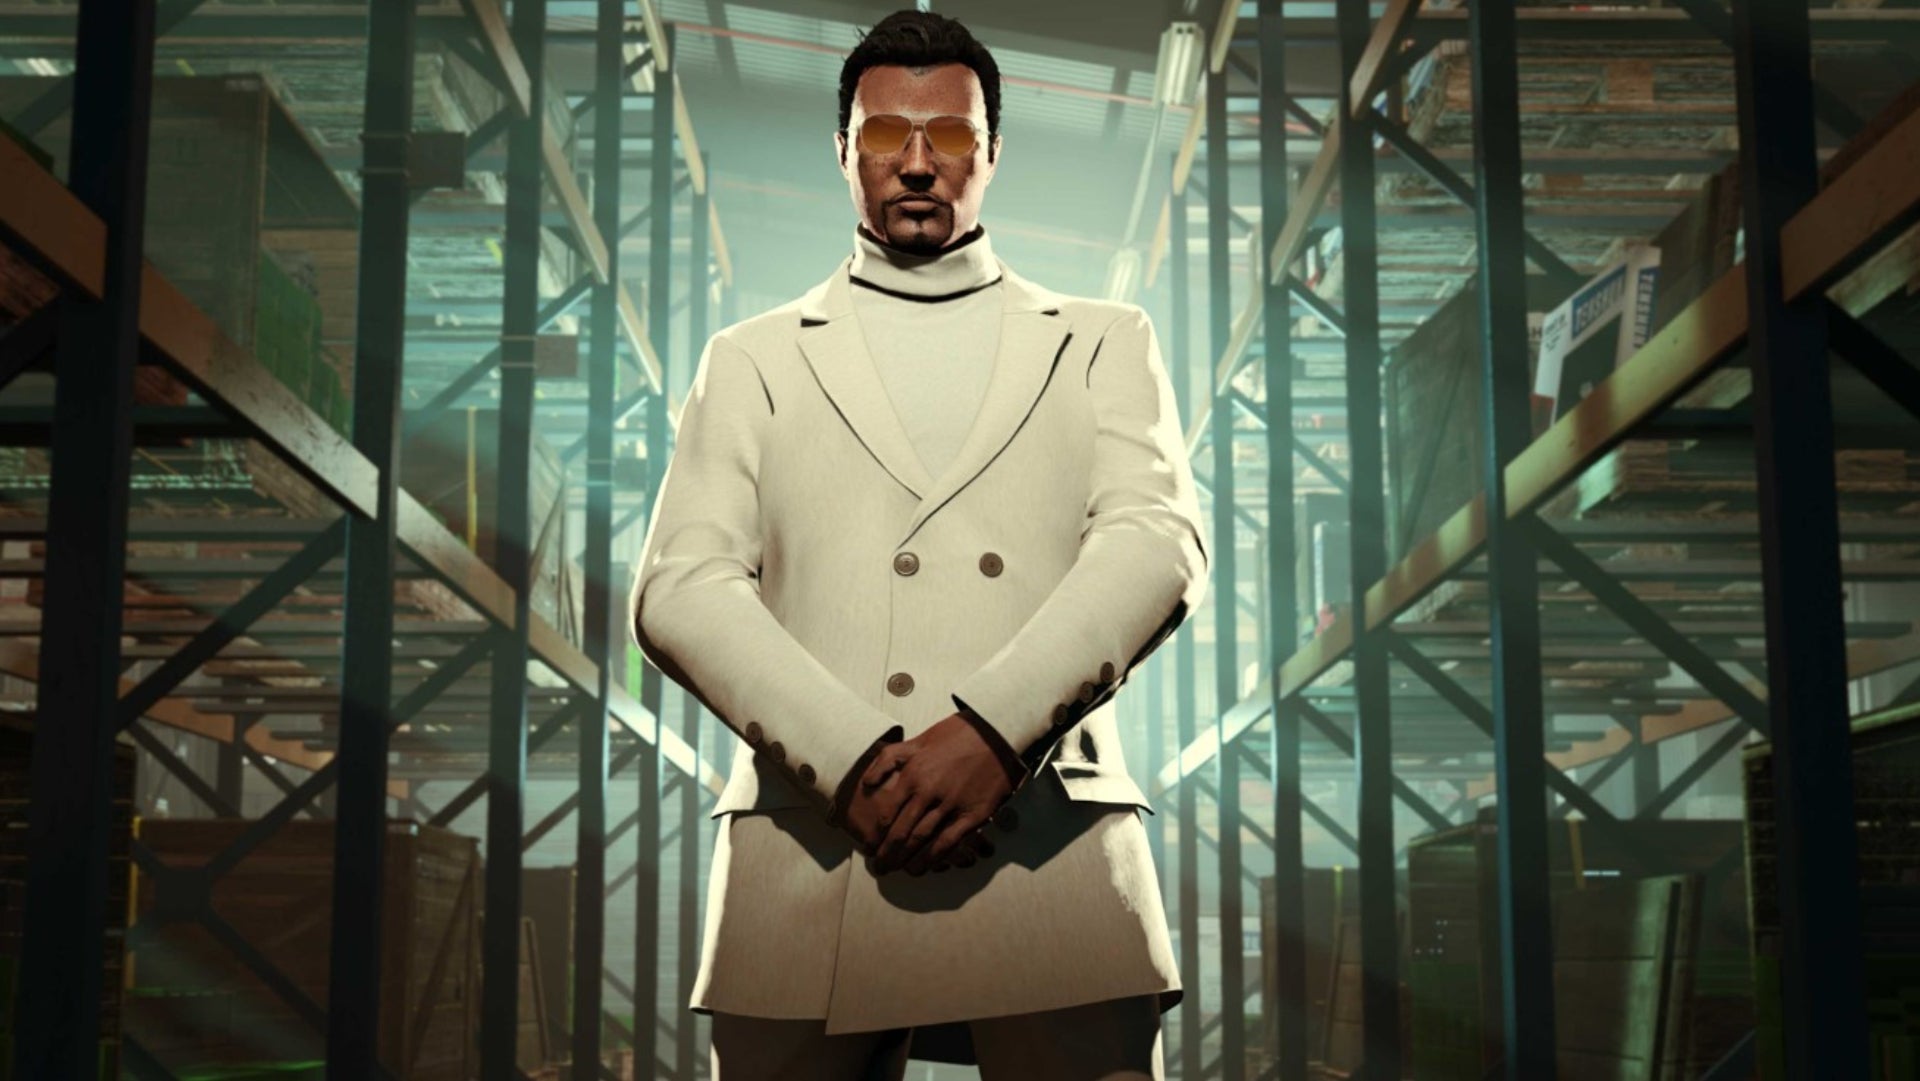 GTA Online, Rockstar Newswire image of character in warehouse.